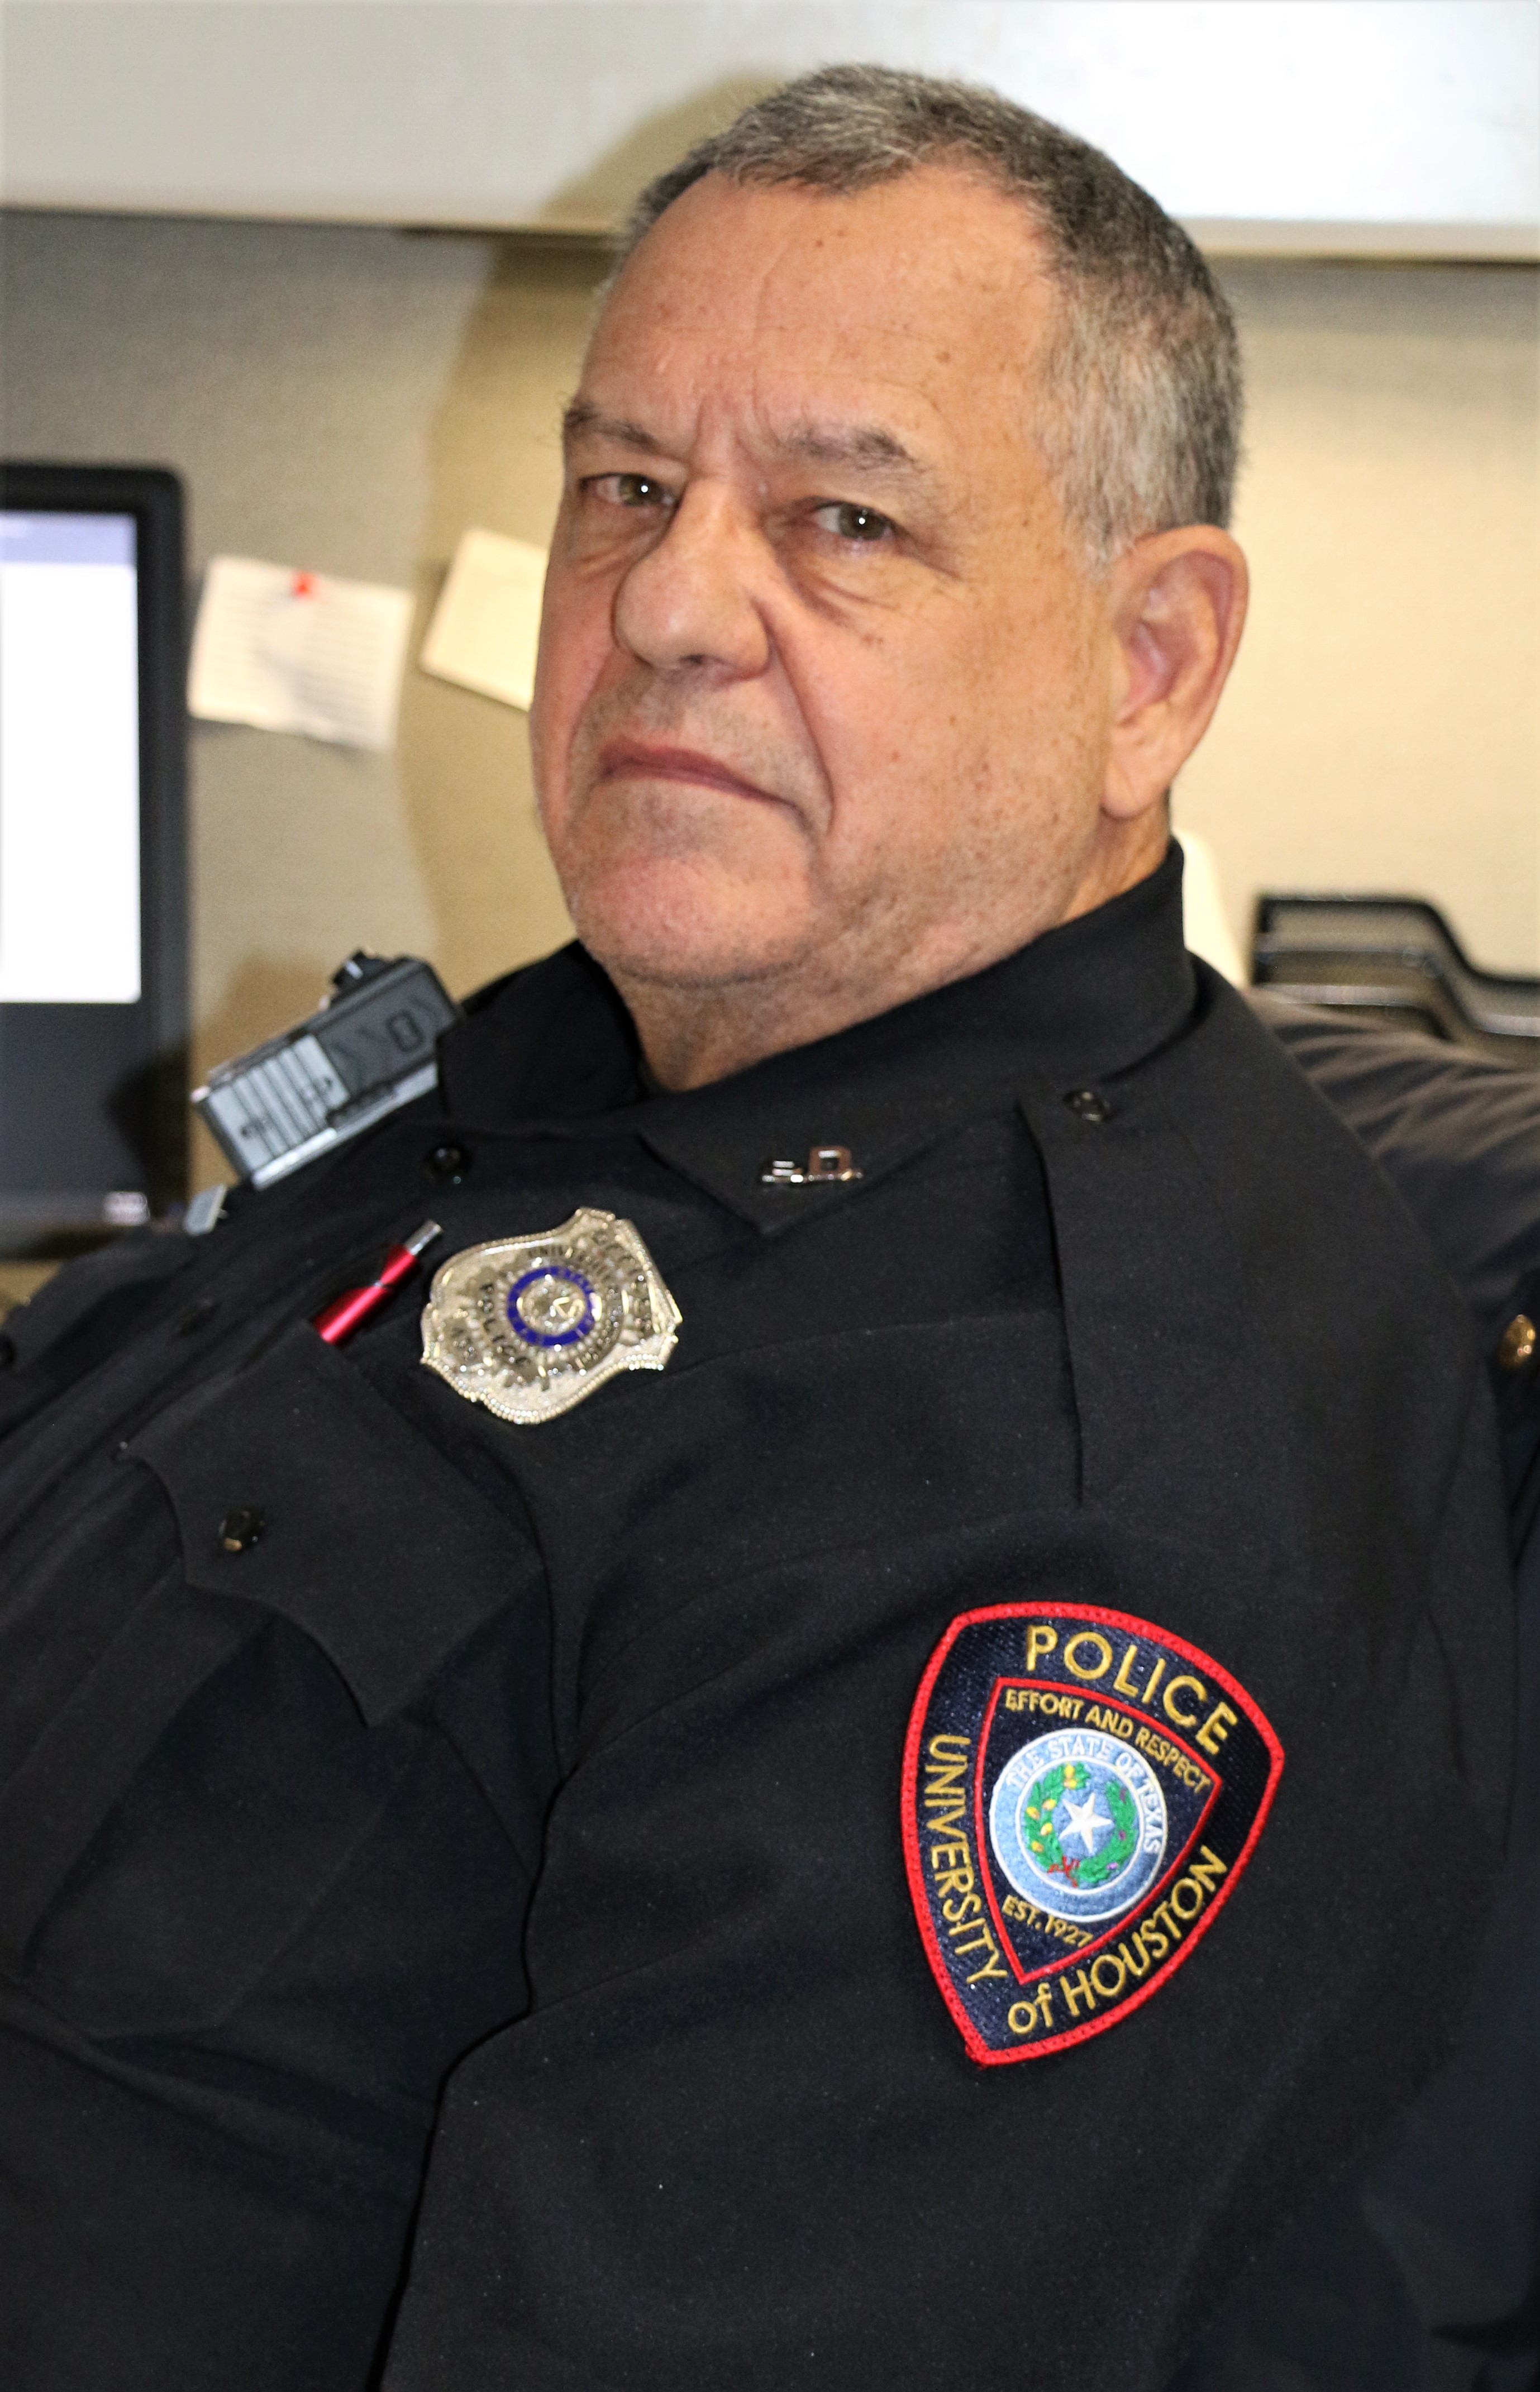 Portrait of a man with short grey hair in a UH police uniform